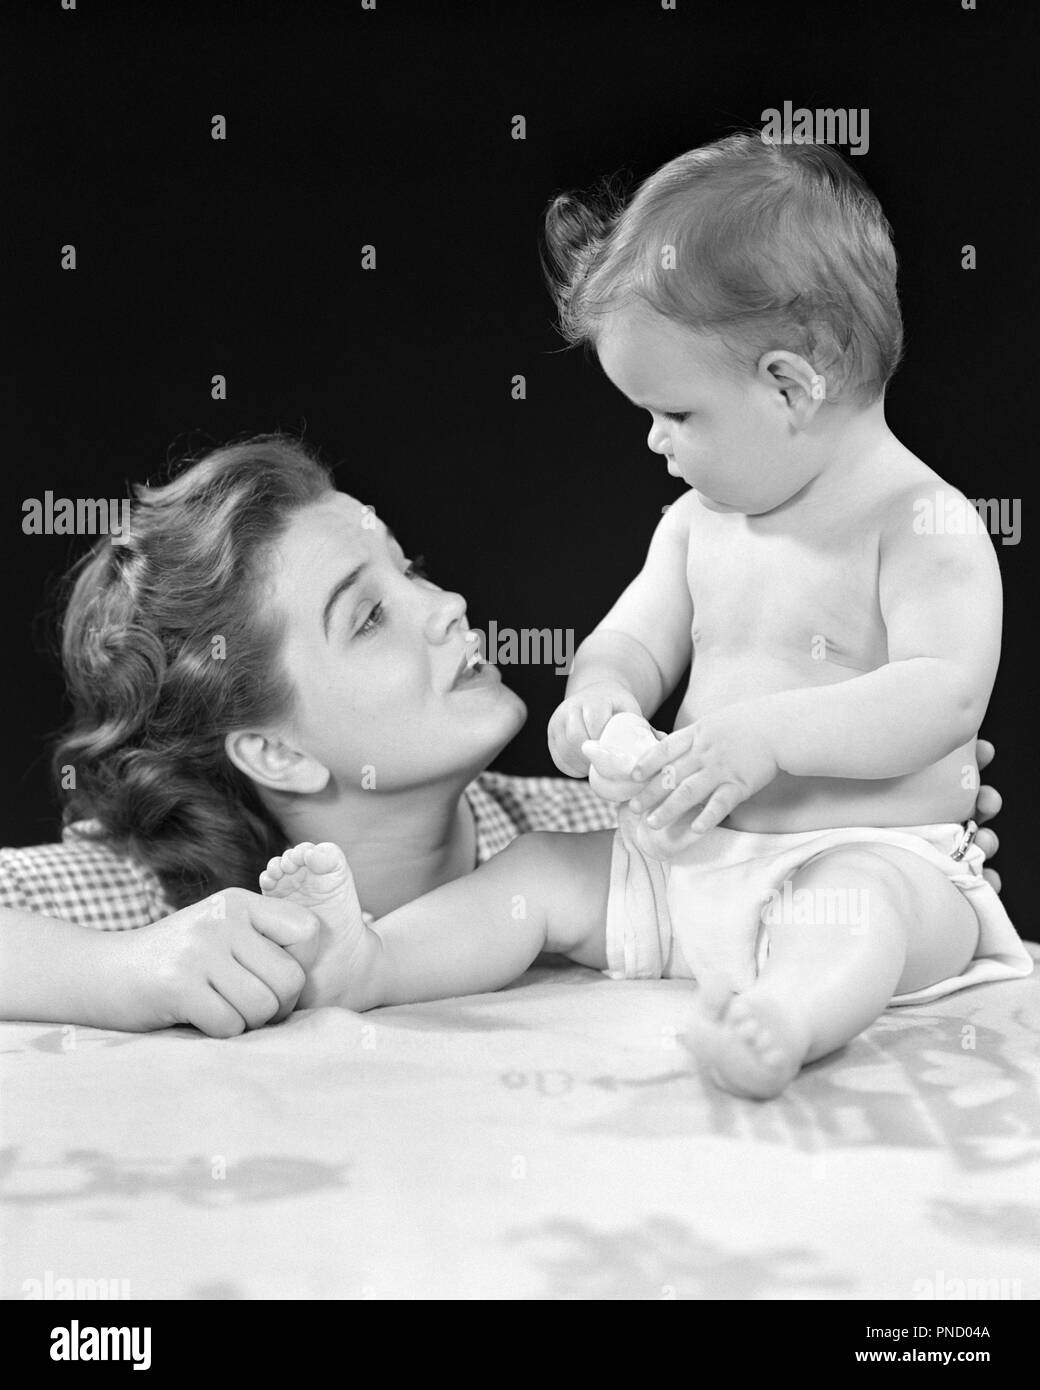 1940s ALERT BABY DAUGHTER SITTING UPRIGHT LOOKING FACE TO FACE AT EXPRESSIVE MOTHER WHO IS PINCHING HER FOOT - b2521 HAR001 HARS JUVENILE FACIAL COMMUNICATION YOUNG ADULT TEAMWORK INFANT STRONG JOY LIFESTYLE FEMALES HOME LIFE FULL-LENGTH LADIES PHYSICAL FITNESS DAUGHTERS PERSONS CARING EXPRESSIONS B&W IS UPRIGHT HAPPINESS HEAD AND SHOULDERS AT LOVING FACE TO FACE WHO CONNECTION EYE TO EYE ALERT CURIOUS STYLISH PERSONAL ATTACHMENT AFFECTION EMOTION JUVENILES MOMS TOGETHERNESS YOUNG ADULT WOMAN BABY GIRL BLACK AND WHITE CAUCASIAN ETHNICITY EXPRESSIVE HAR001 INQUISITIVE OLD FASHIONED Stock Photo